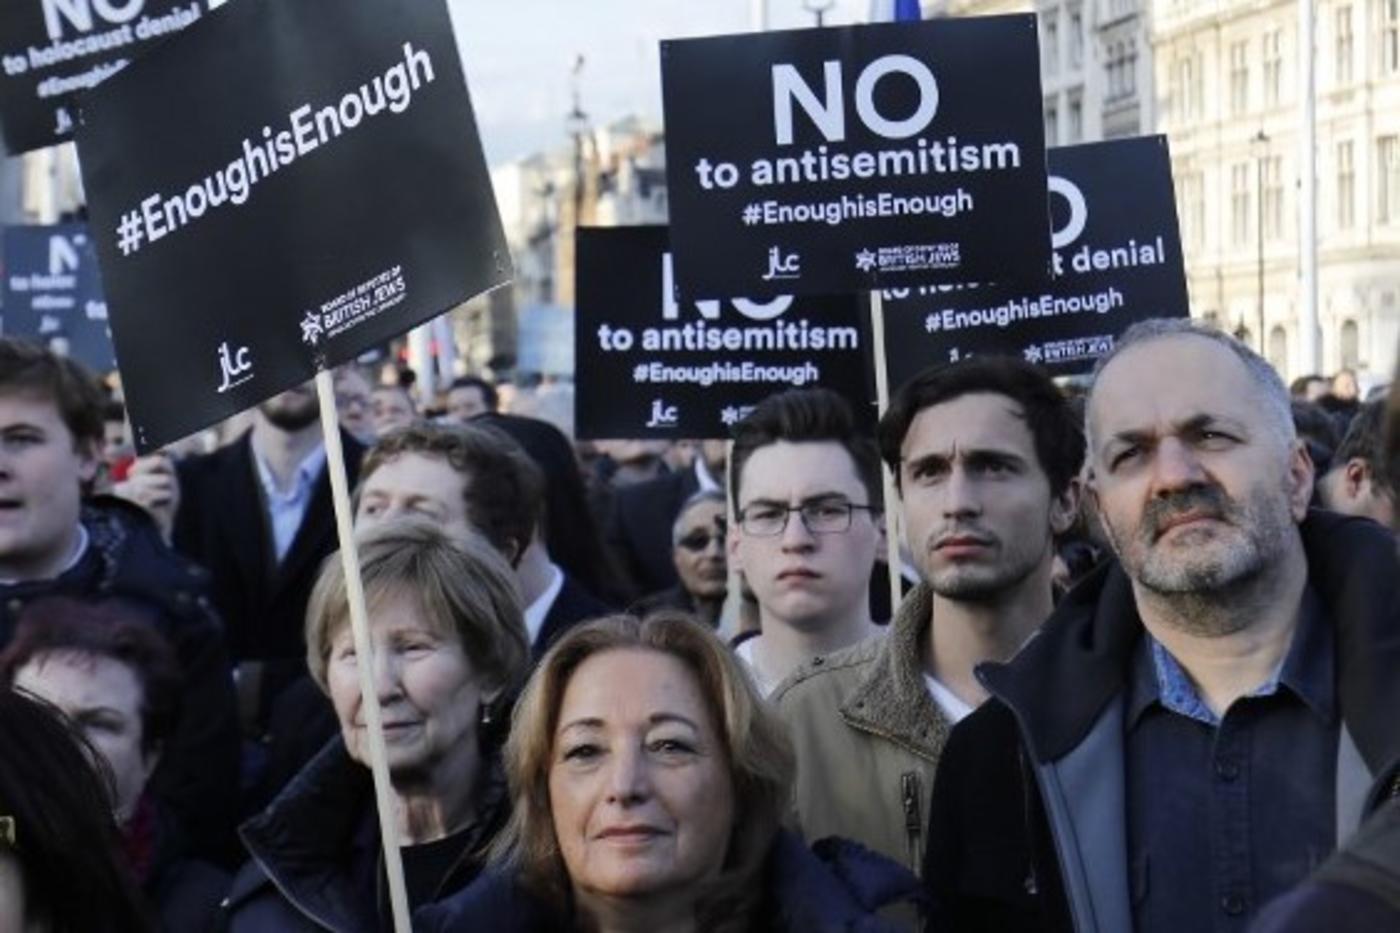 Activists protest against alleged Labour antisemitism in London in 2018 (AFP)